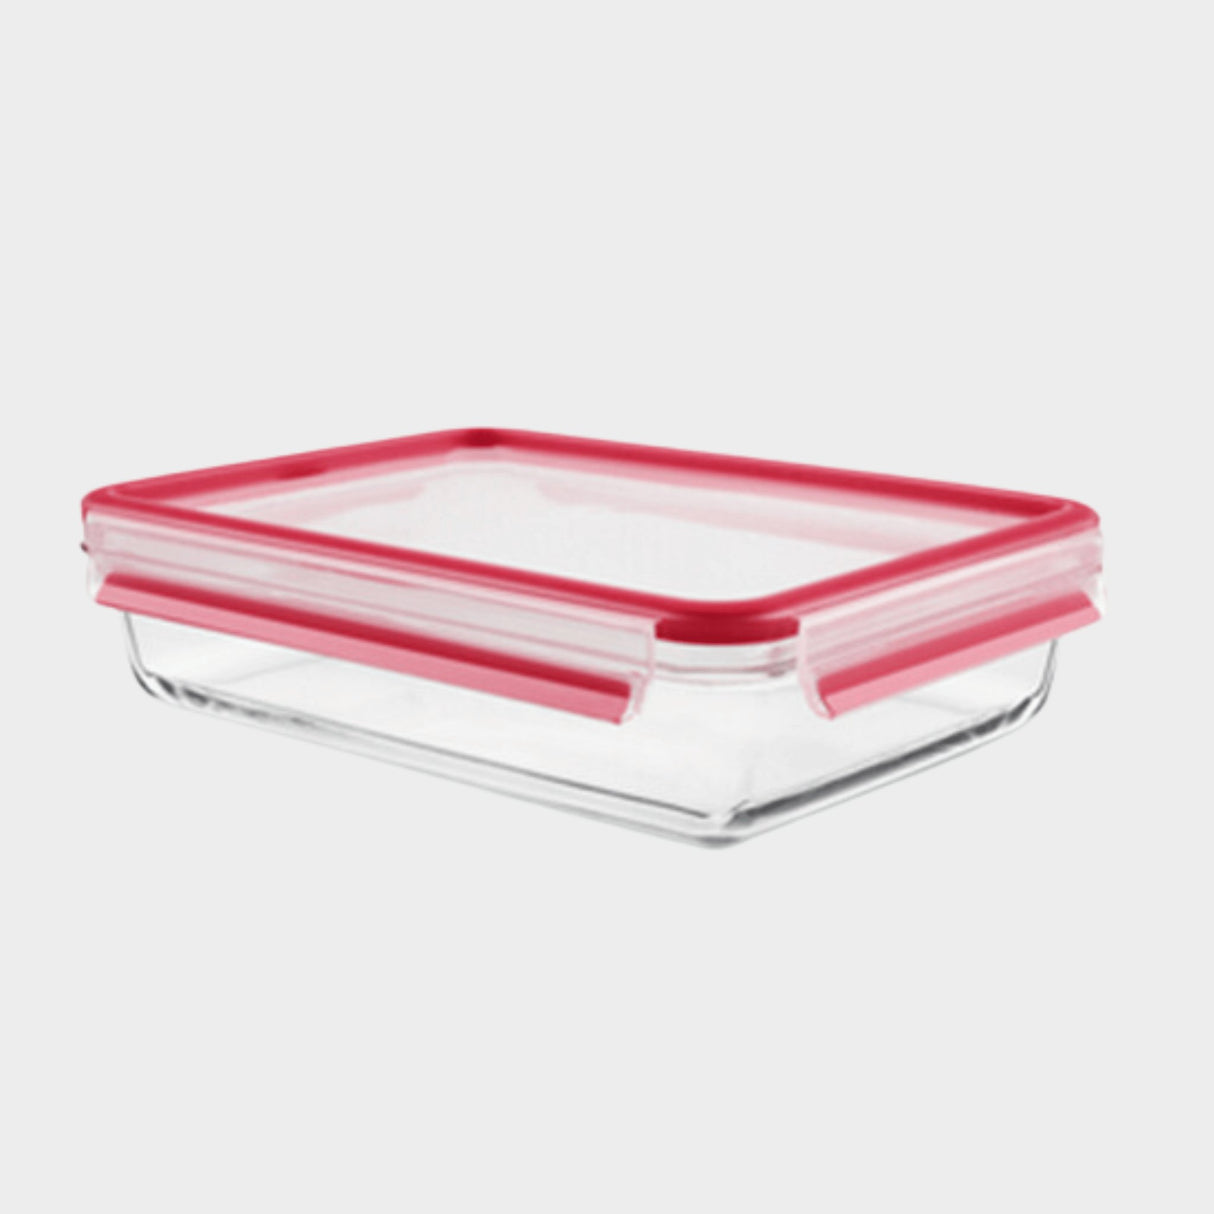 Tefal 2L Master Seal Food Container K3010512 - Red/Clear - KWT Tech Mart